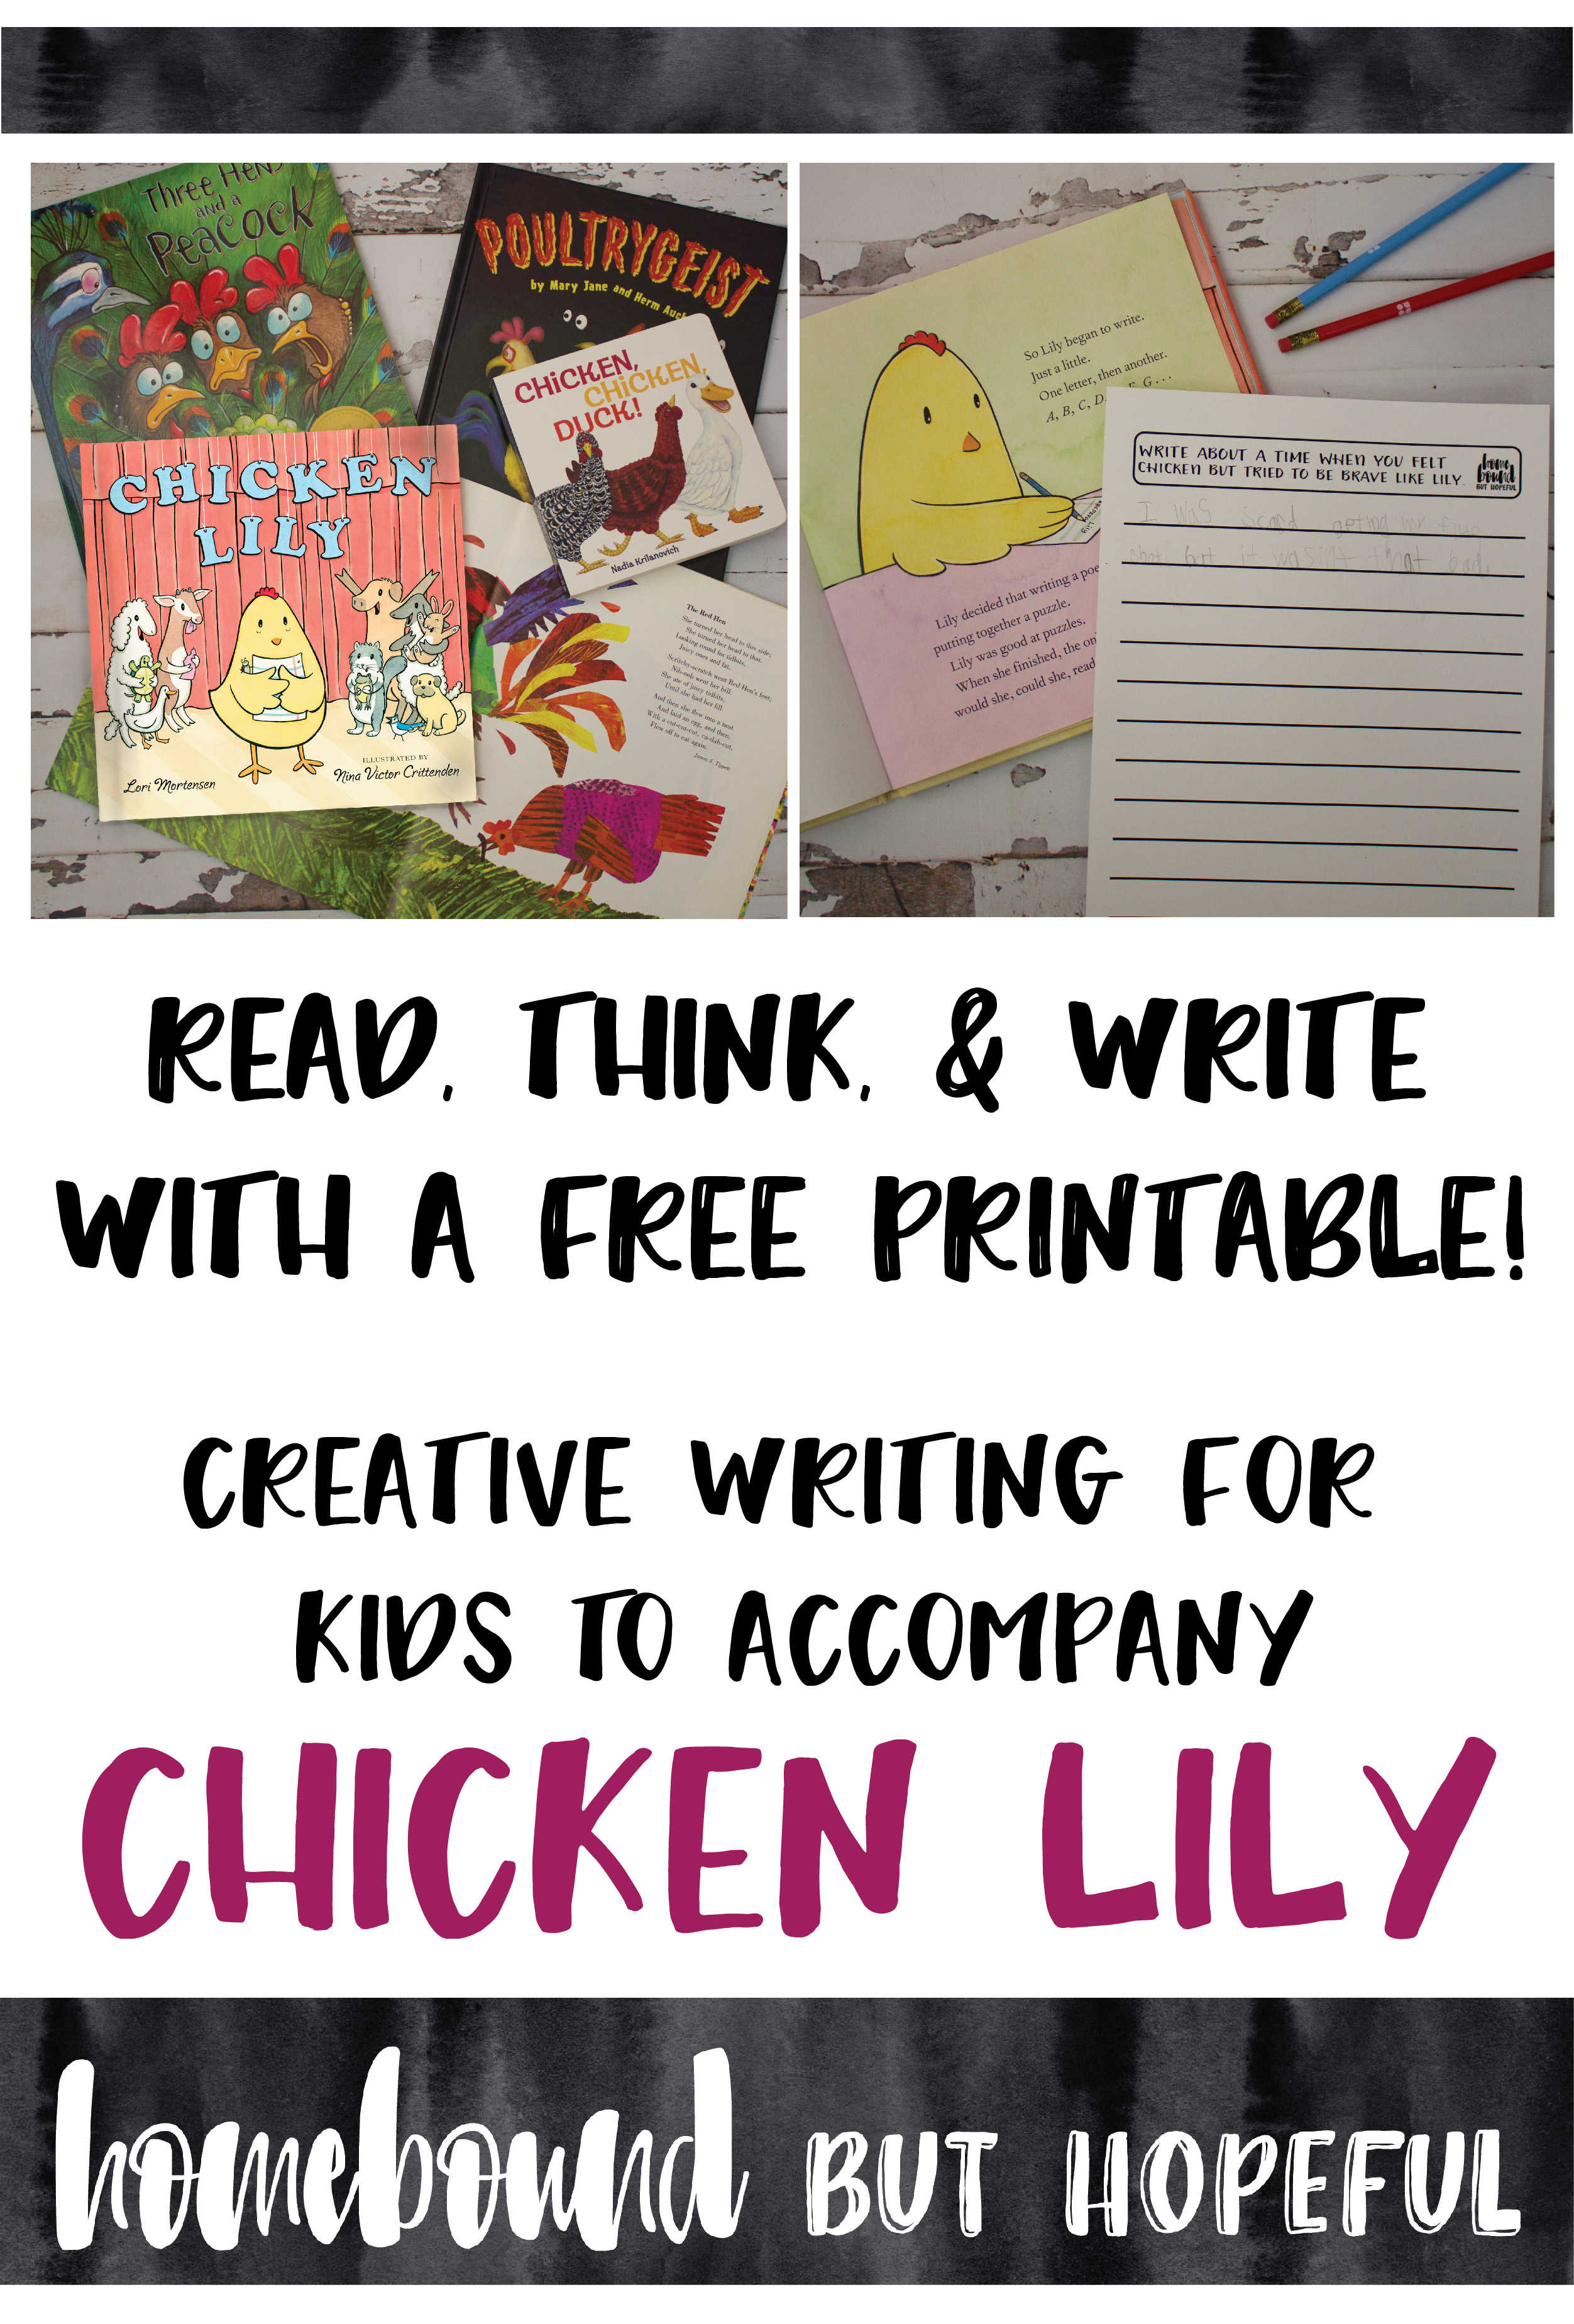 Do your kids sometimes feel a little bit chicken? Help them discover their inner courage with Chicken Lily and the free printables to pair with the book.